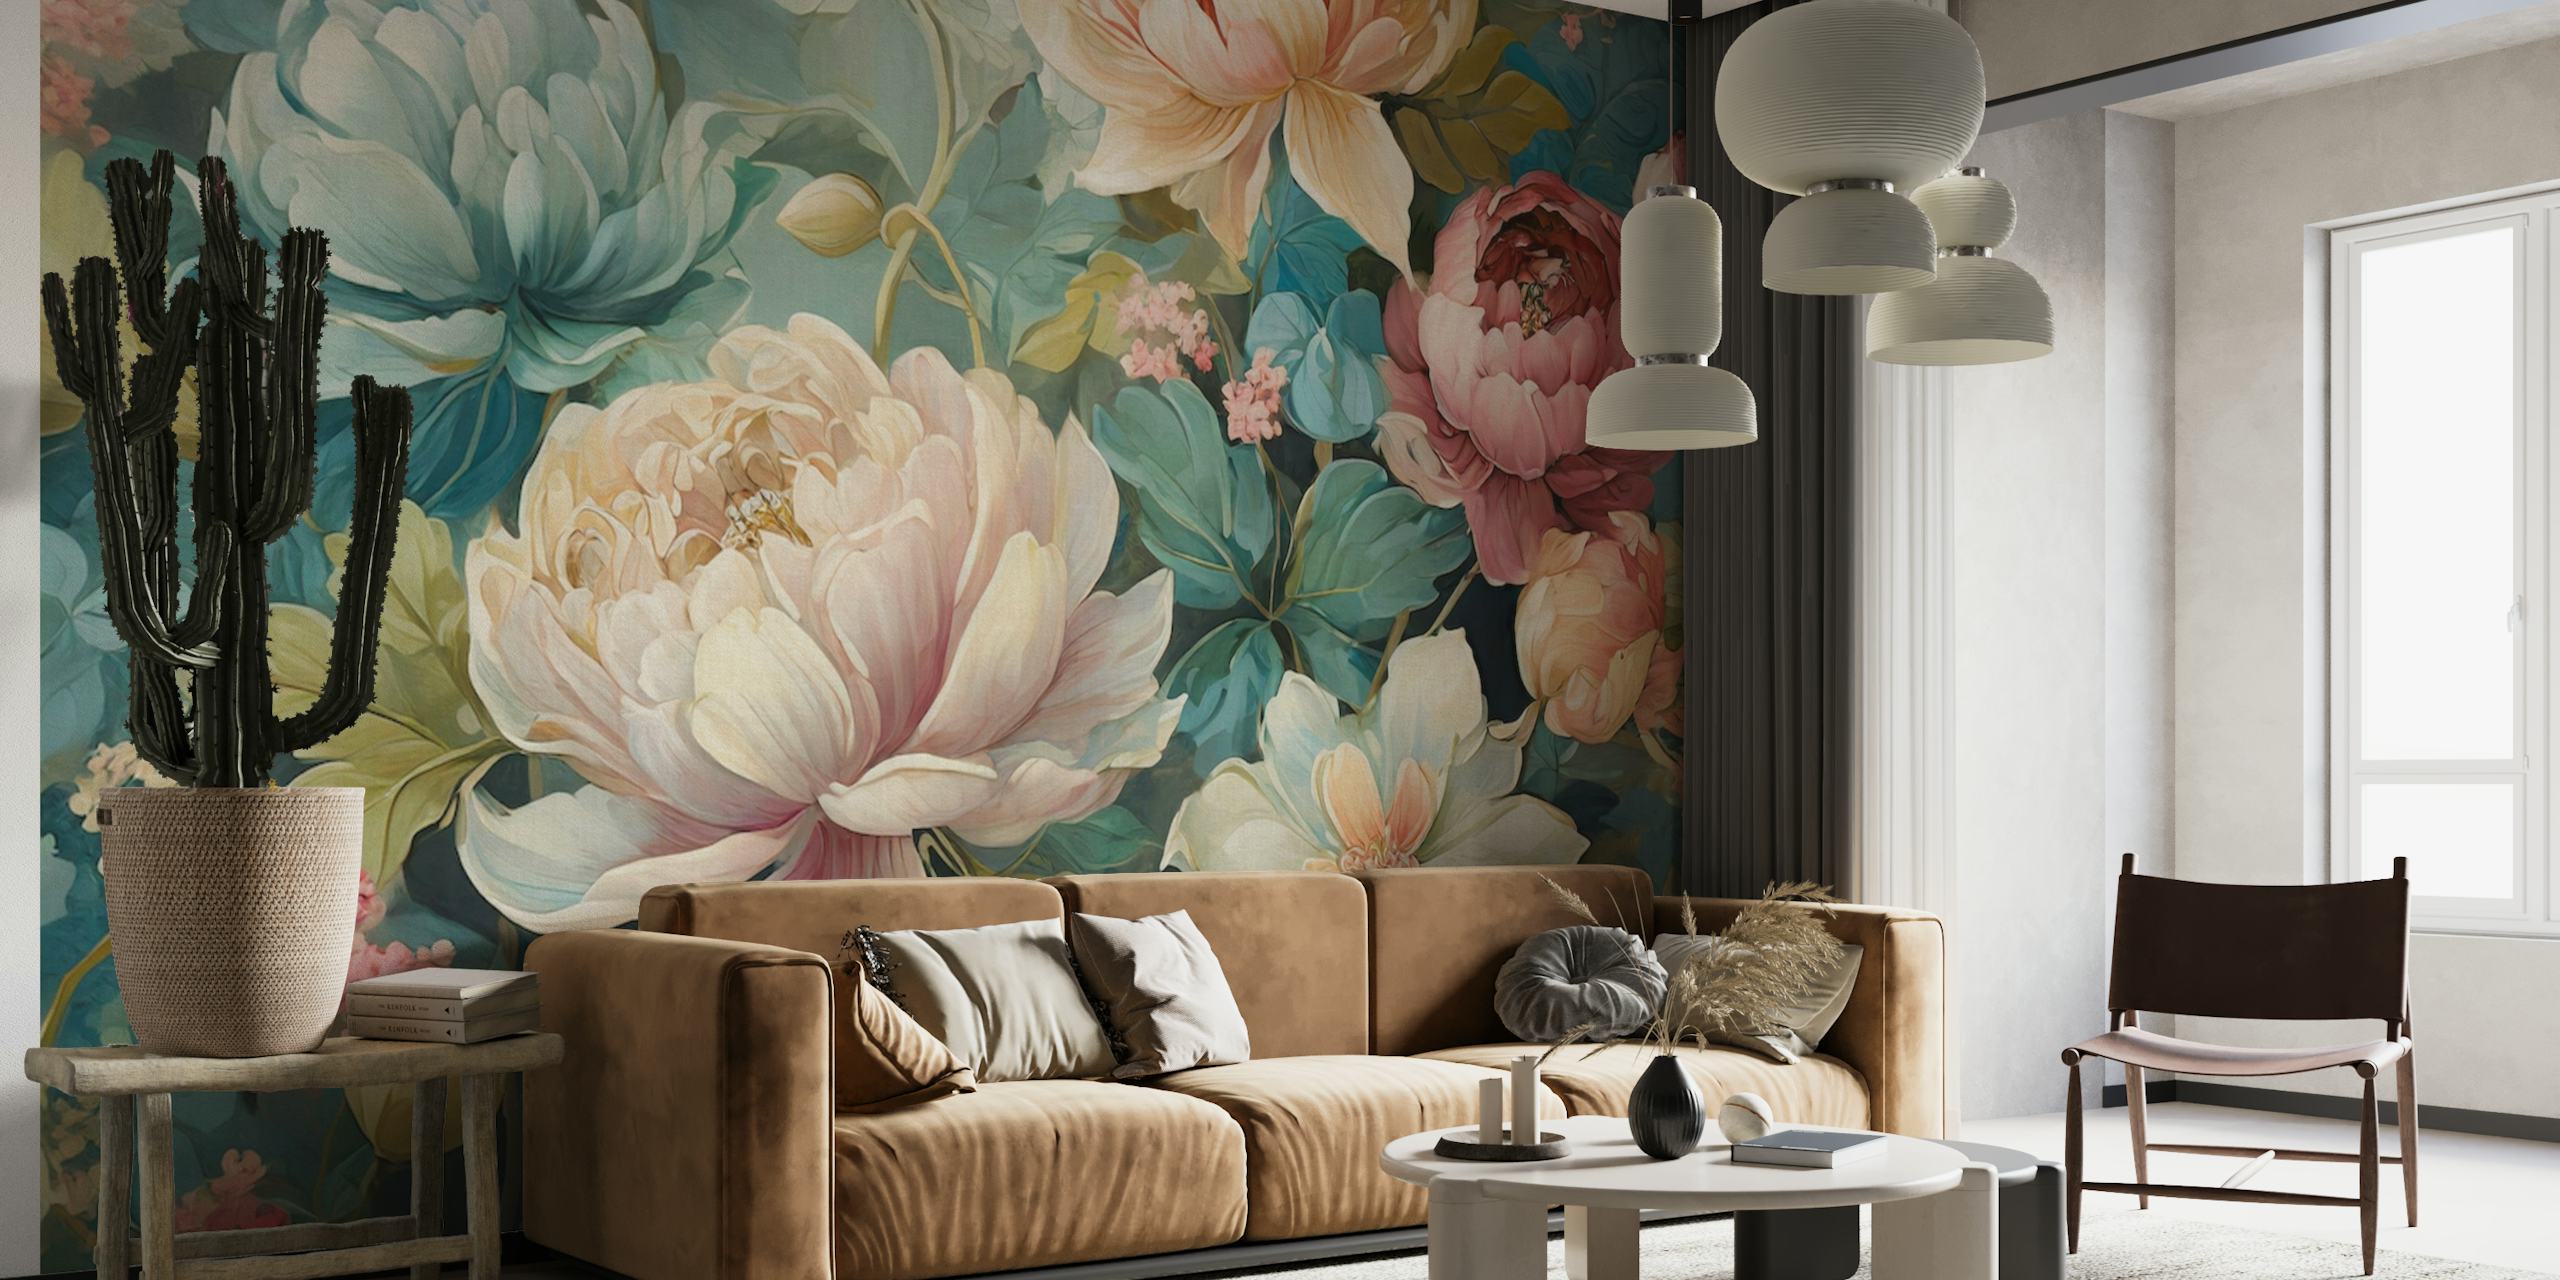 Pastel-colored floral wall mural with lush spring flowers in shades of pink, blue, and green.